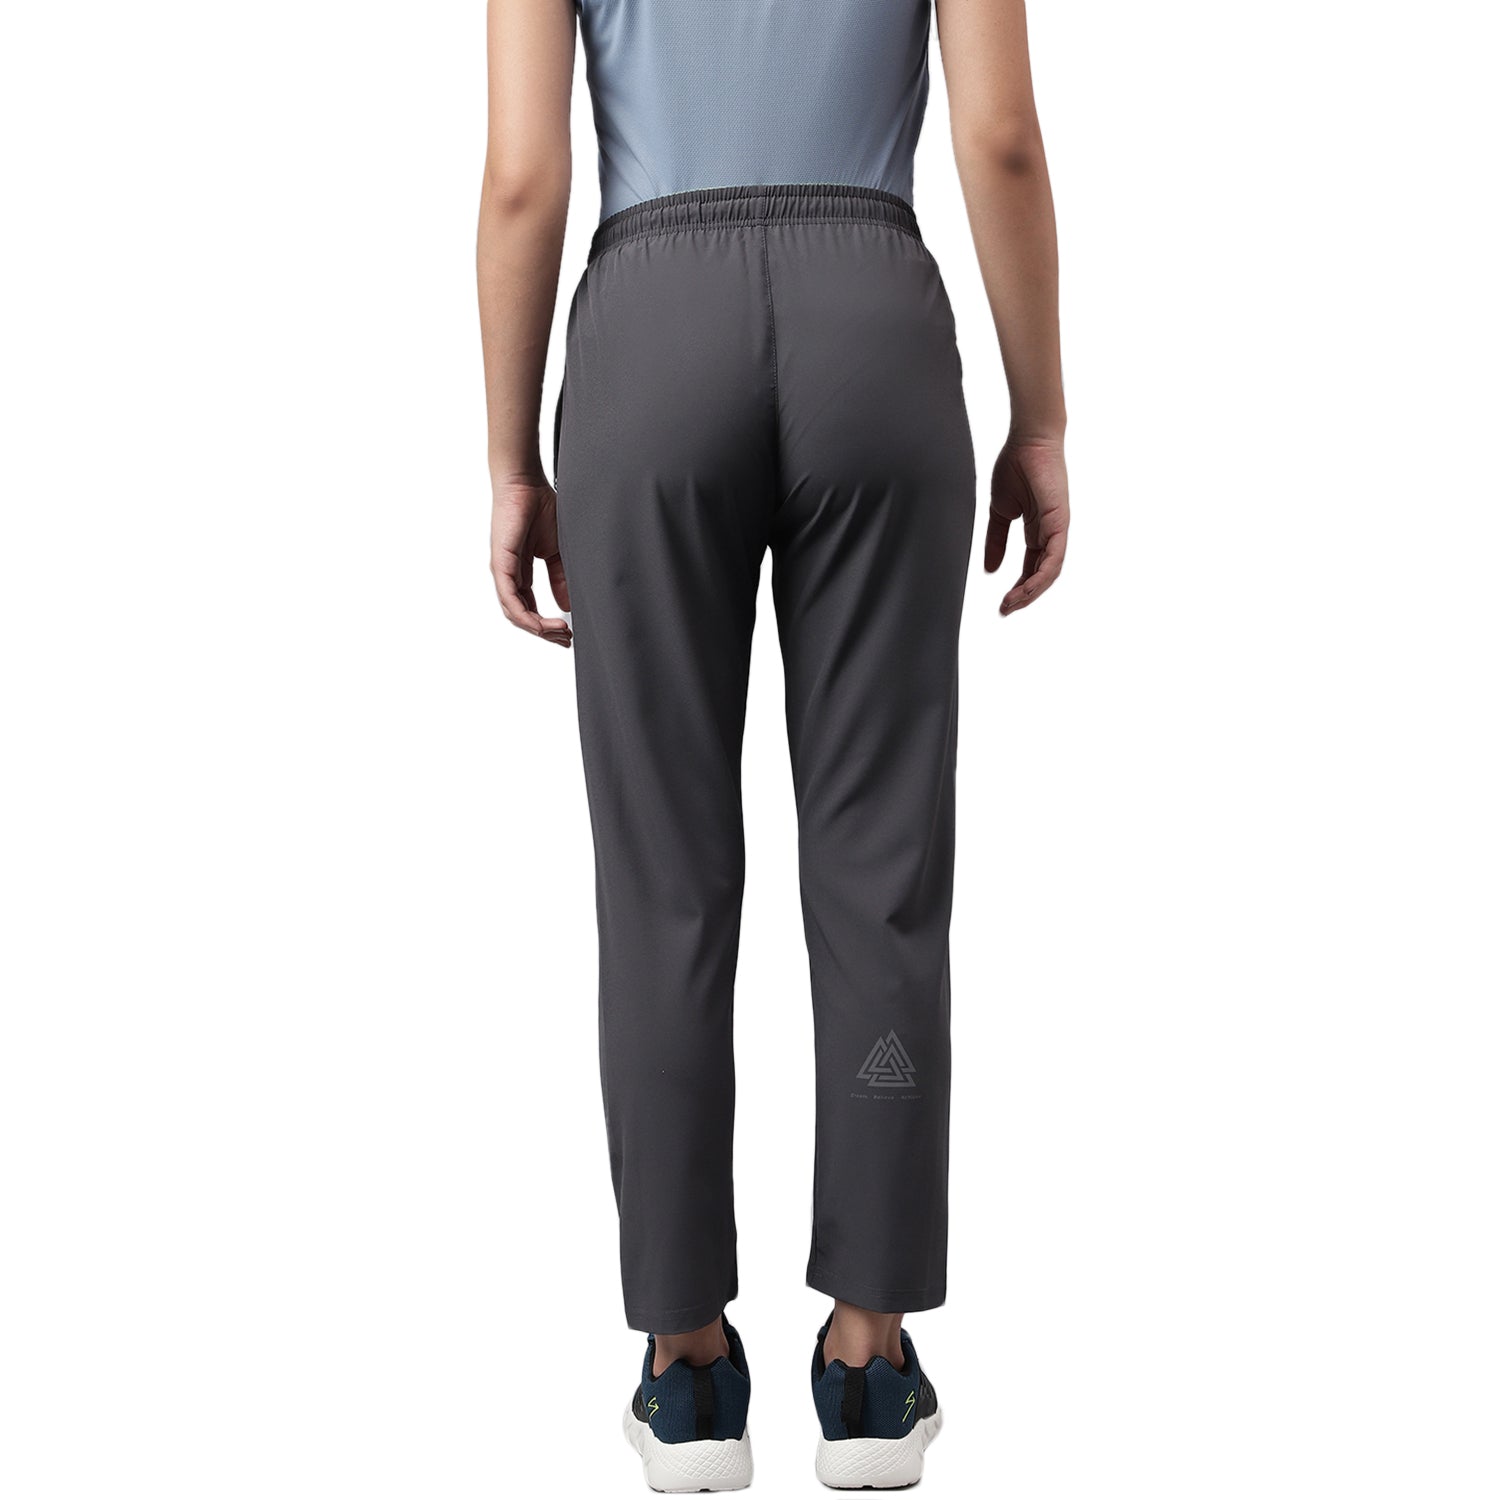 SG UNPAR By SG Women's Grey Track Pant | Ideal for Trail Running, Fitness & Training, Jogging, Regular & Fashion Wear